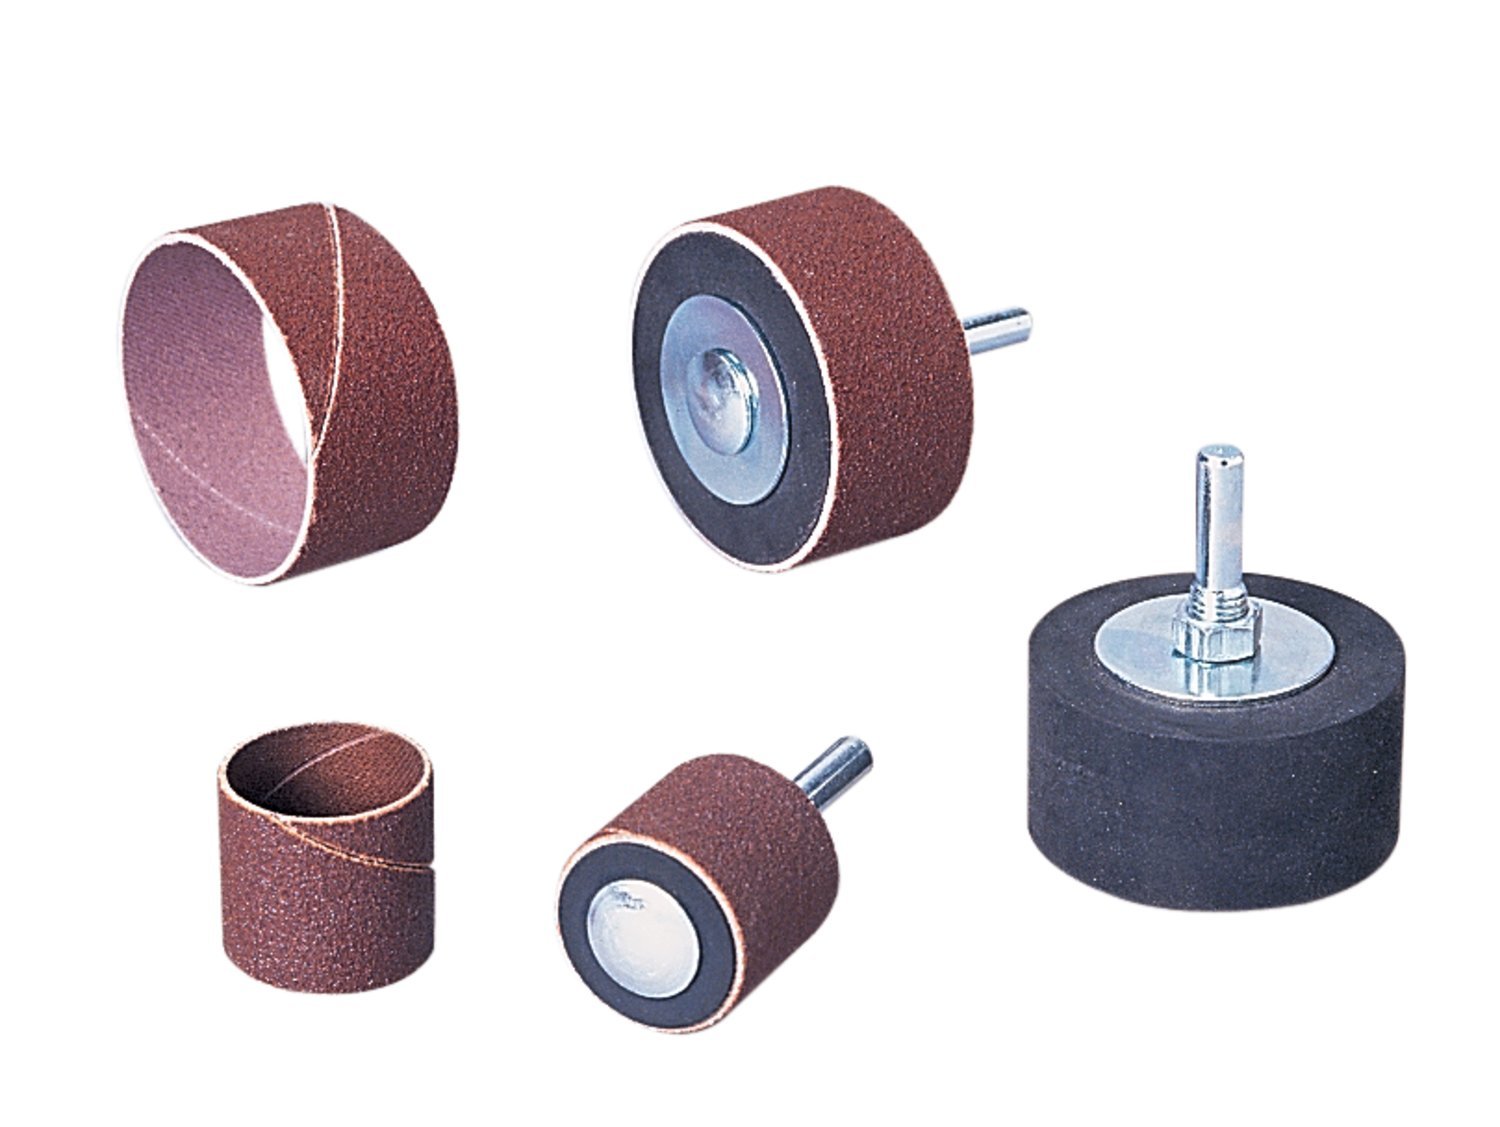 7010330730 - Standard Abrasives A/O Spiral Band 706865, 3/4 in x 3/4 in 180, 100
ea/Case